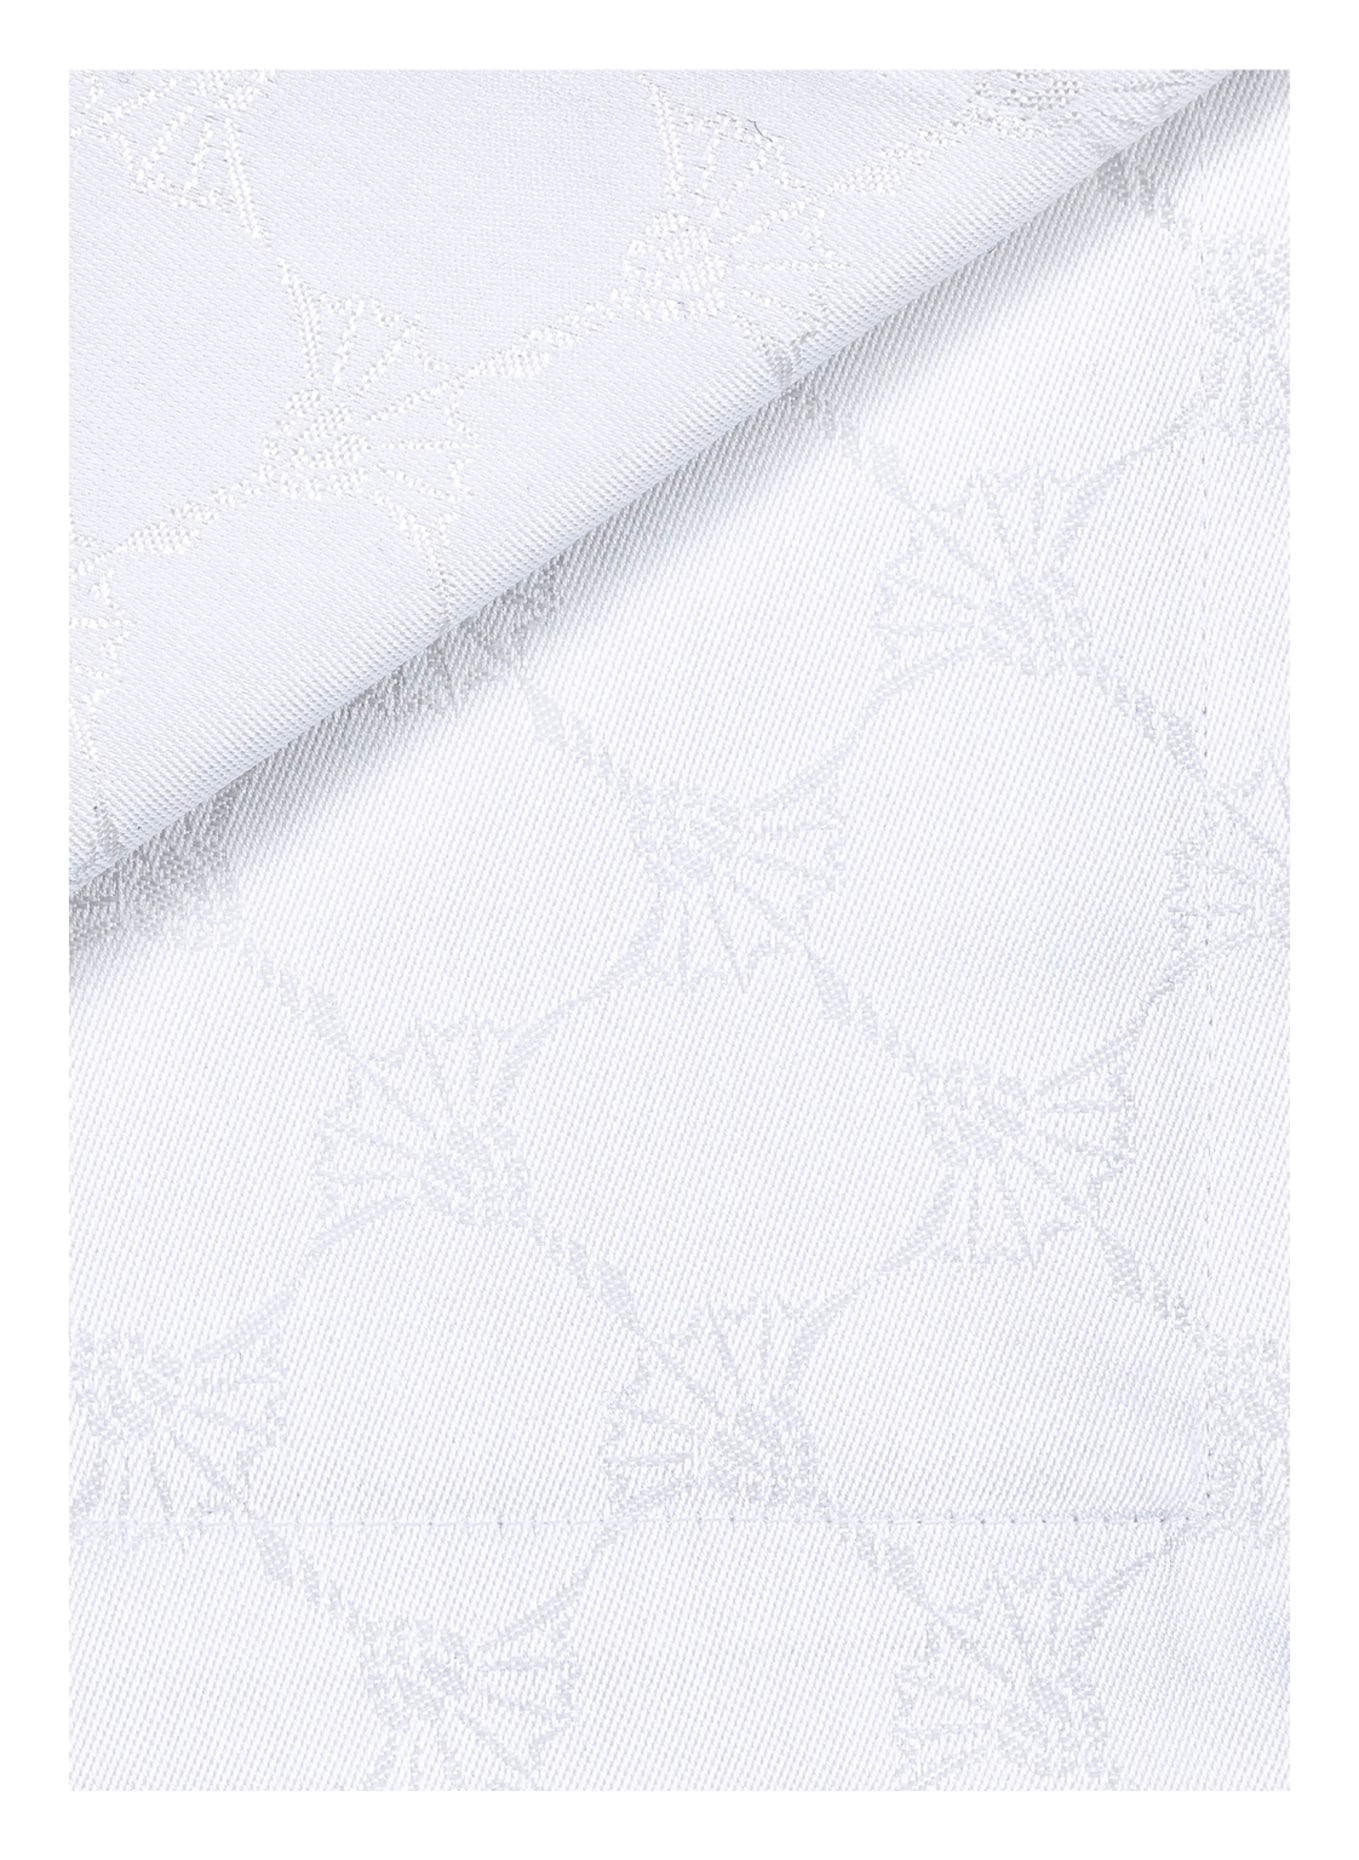 JOOP! Table cloth CORNFLOWER ALL-OVER in white